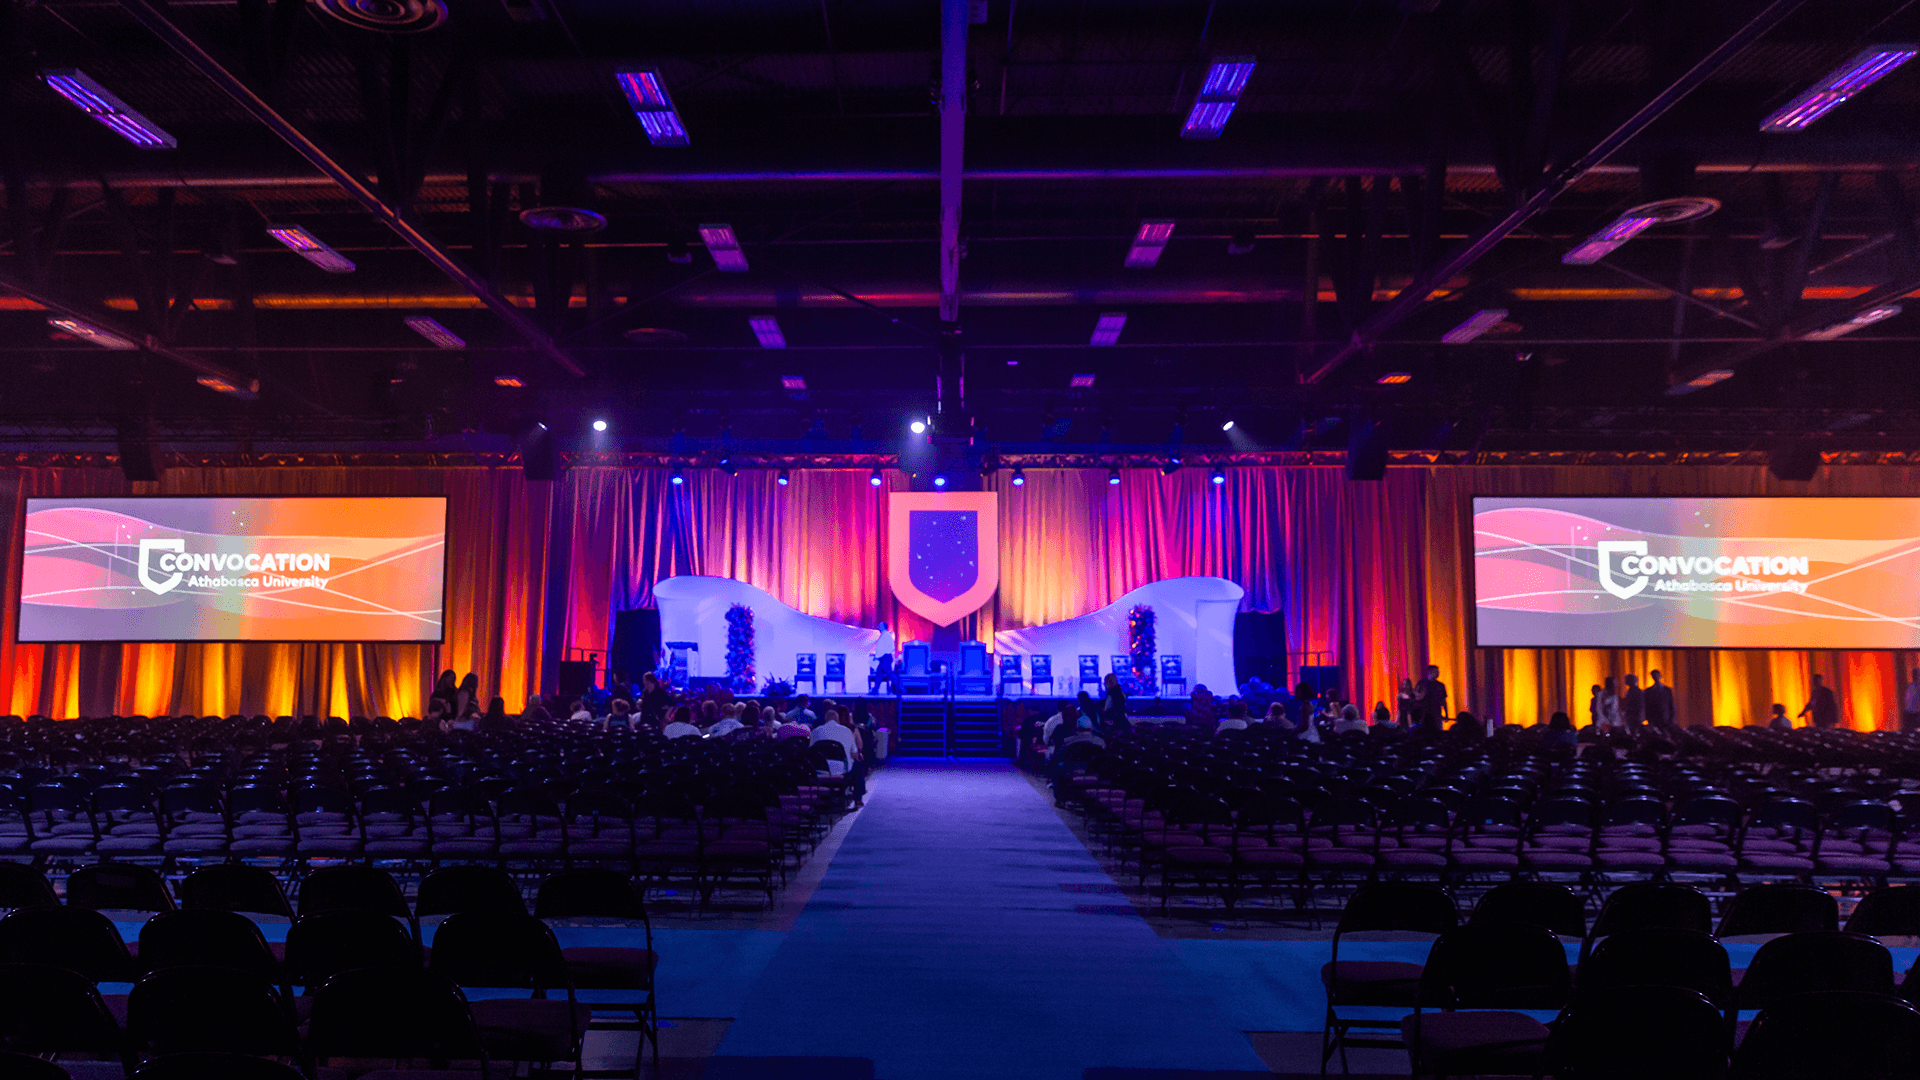 Athabasca University convocation ceremony stage